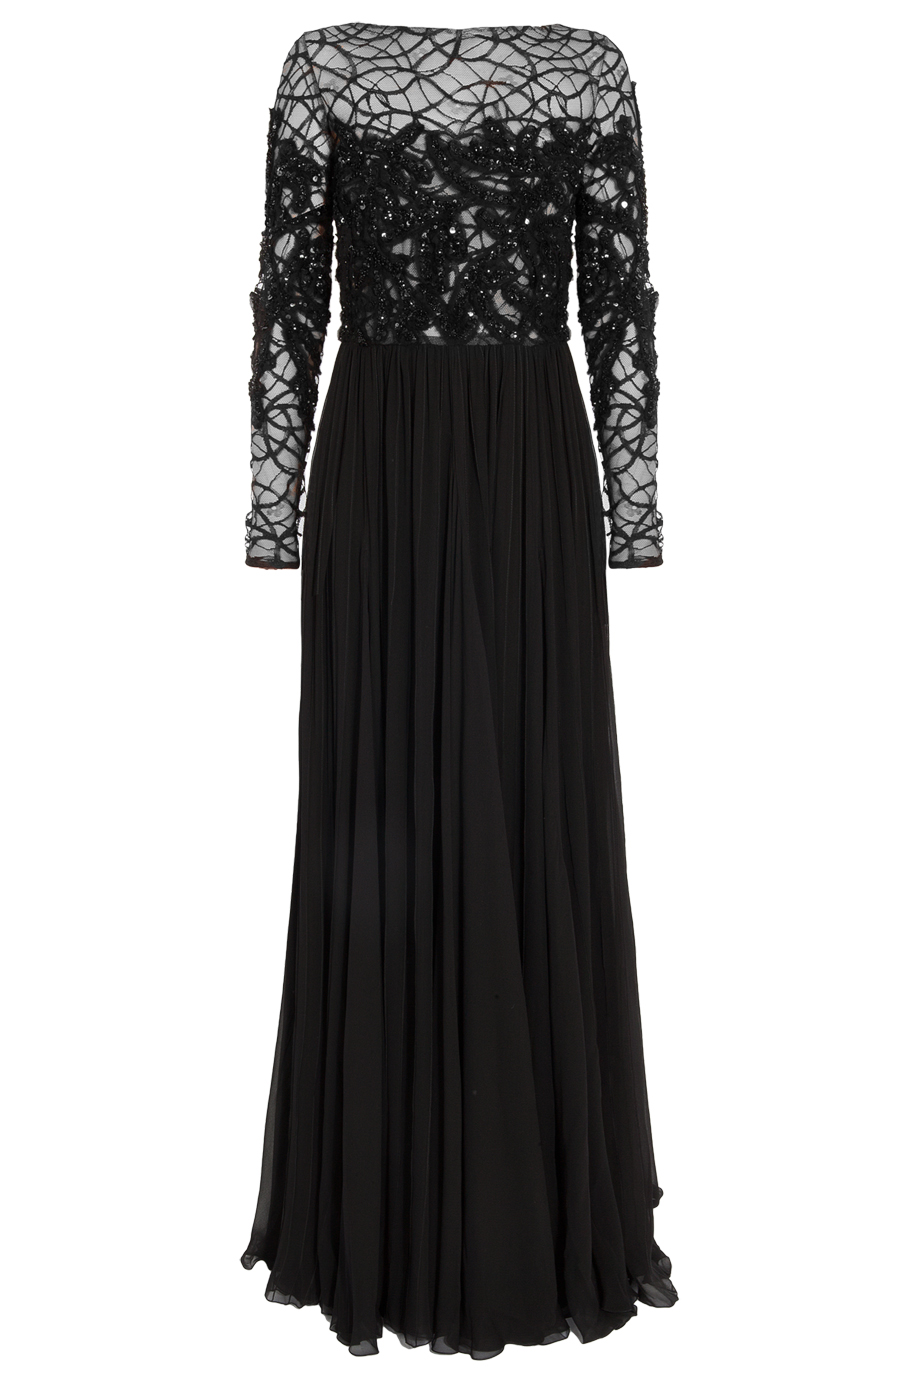 Lyst - Elie saab Embroidered Floor Length Gown With Lace And Silk in Black